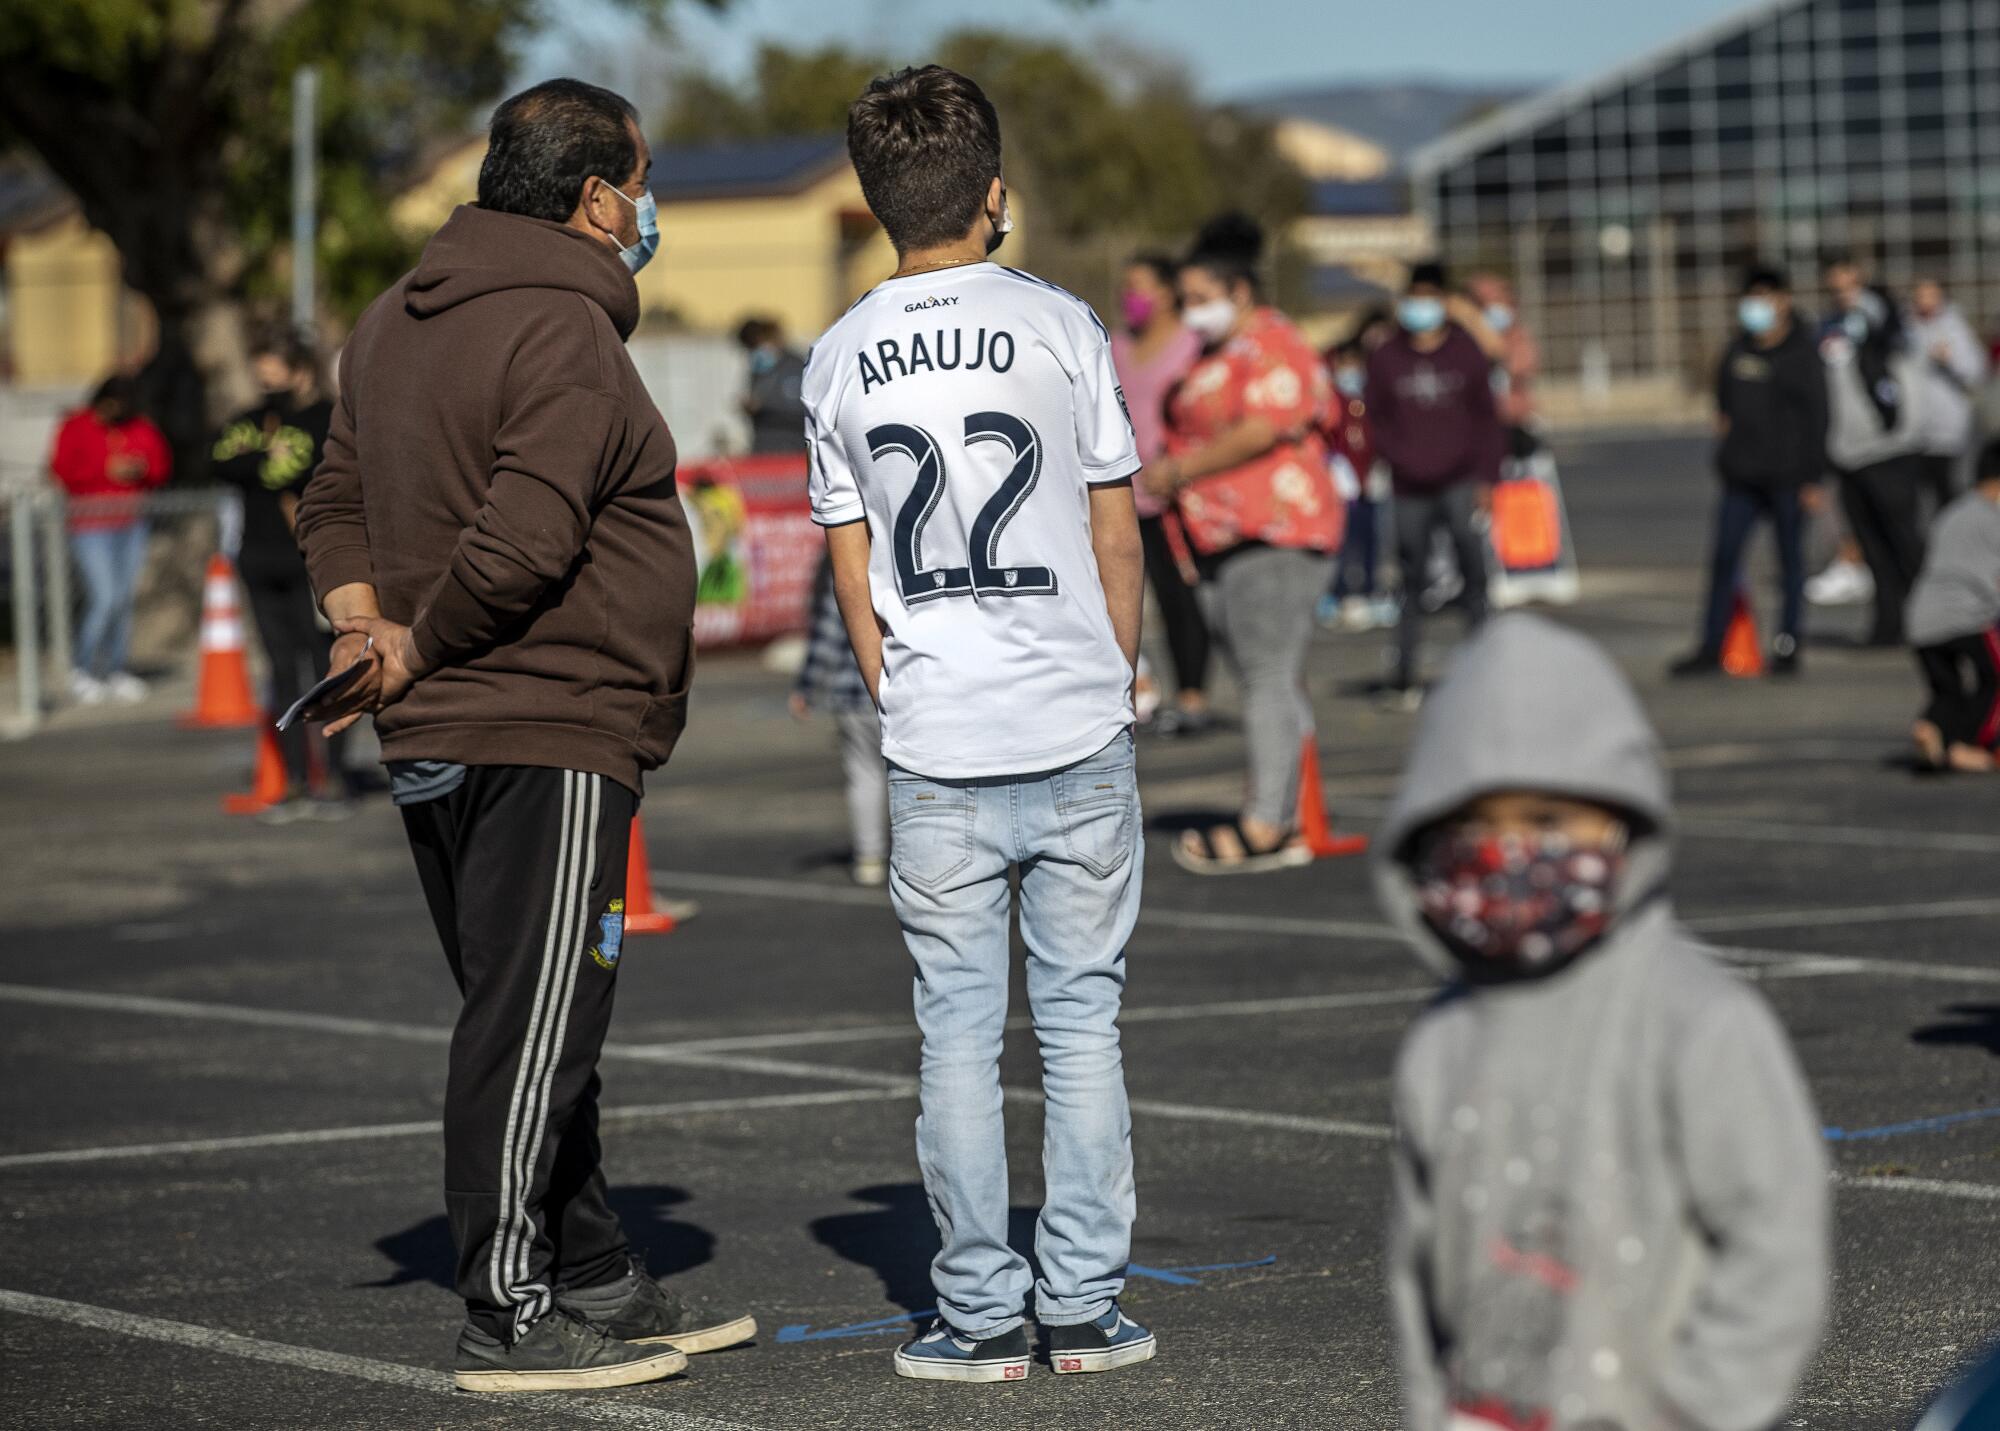 Lazaro Velazquez, 55, left, and his son Enrigue, 14, wait in line with others at Lompoc High School.